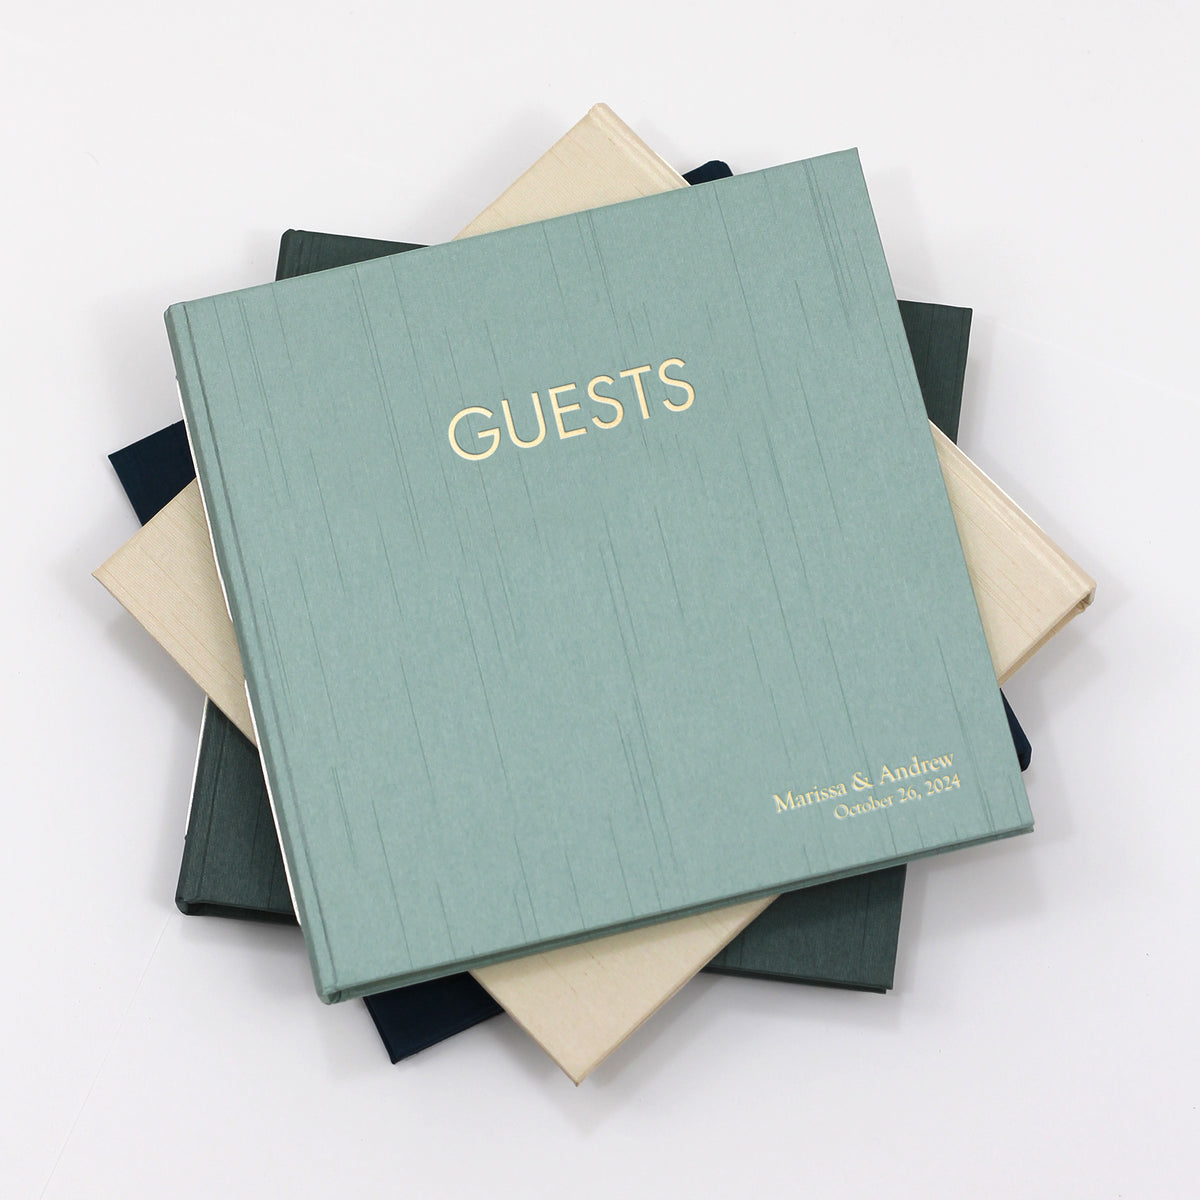 Event Guestbook Embossed with “Guests” | Cover: Champagne Silk | Available Personalized